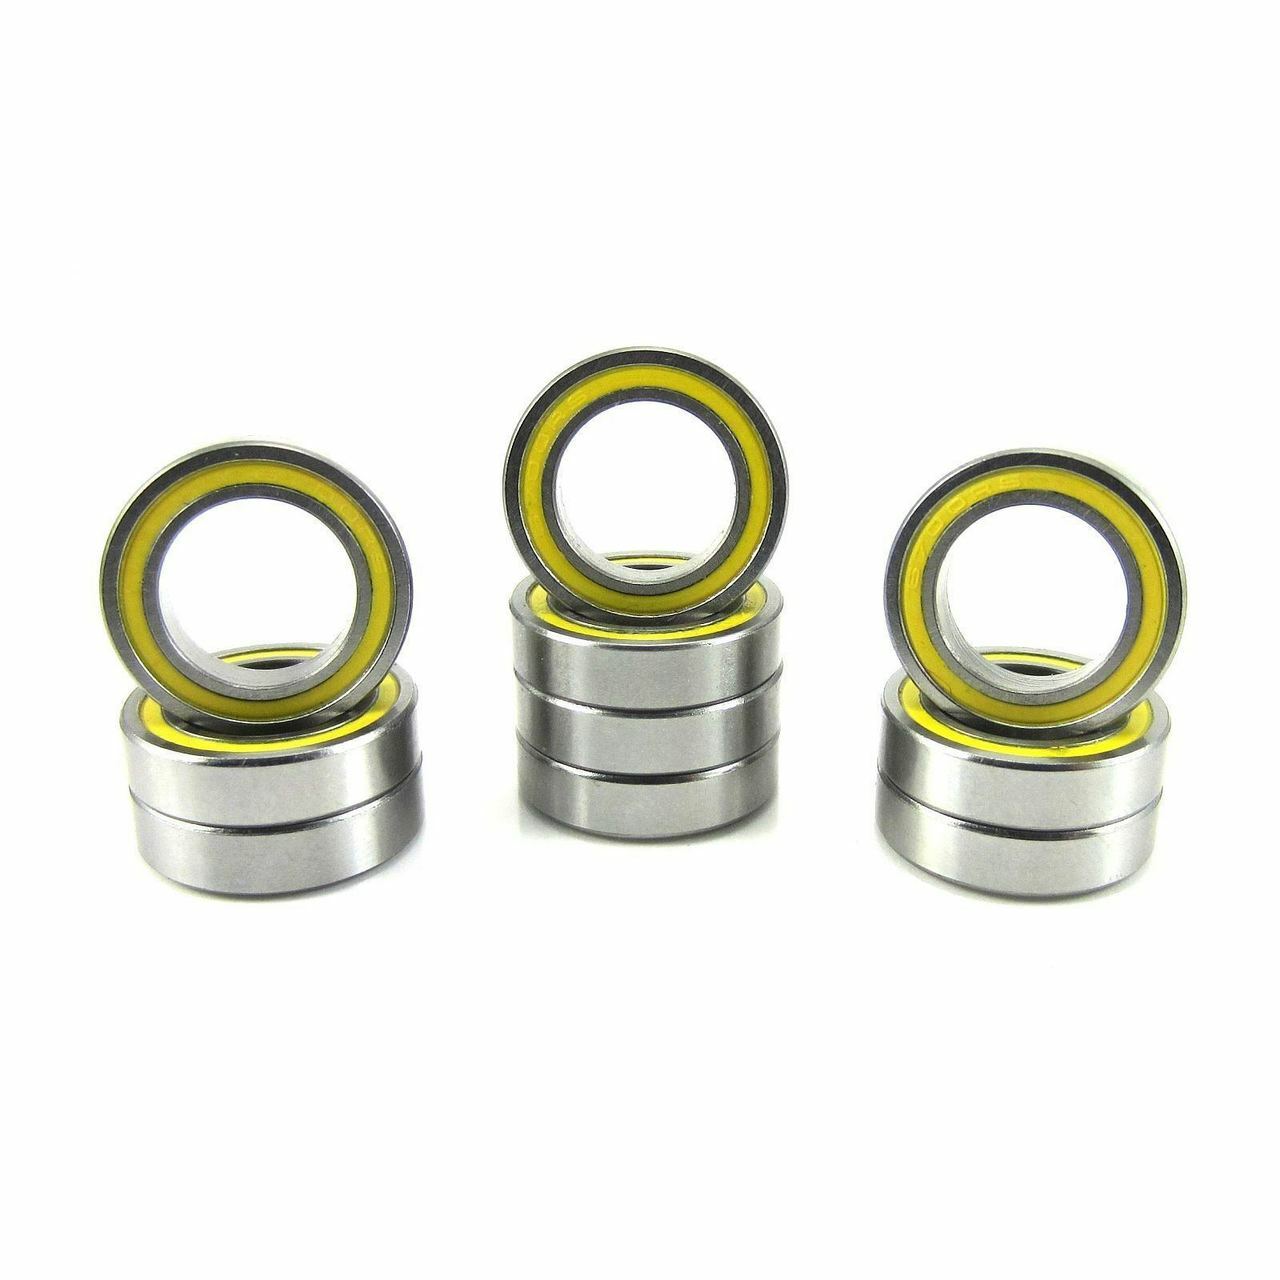 MR1016-2RS 10x16x4 Precision High Speed RC Car Ball Bearing, Chrome Steel (GCr15) with Yellow Rubber Seals ABEC-1 ABEC-3 ABEC-5